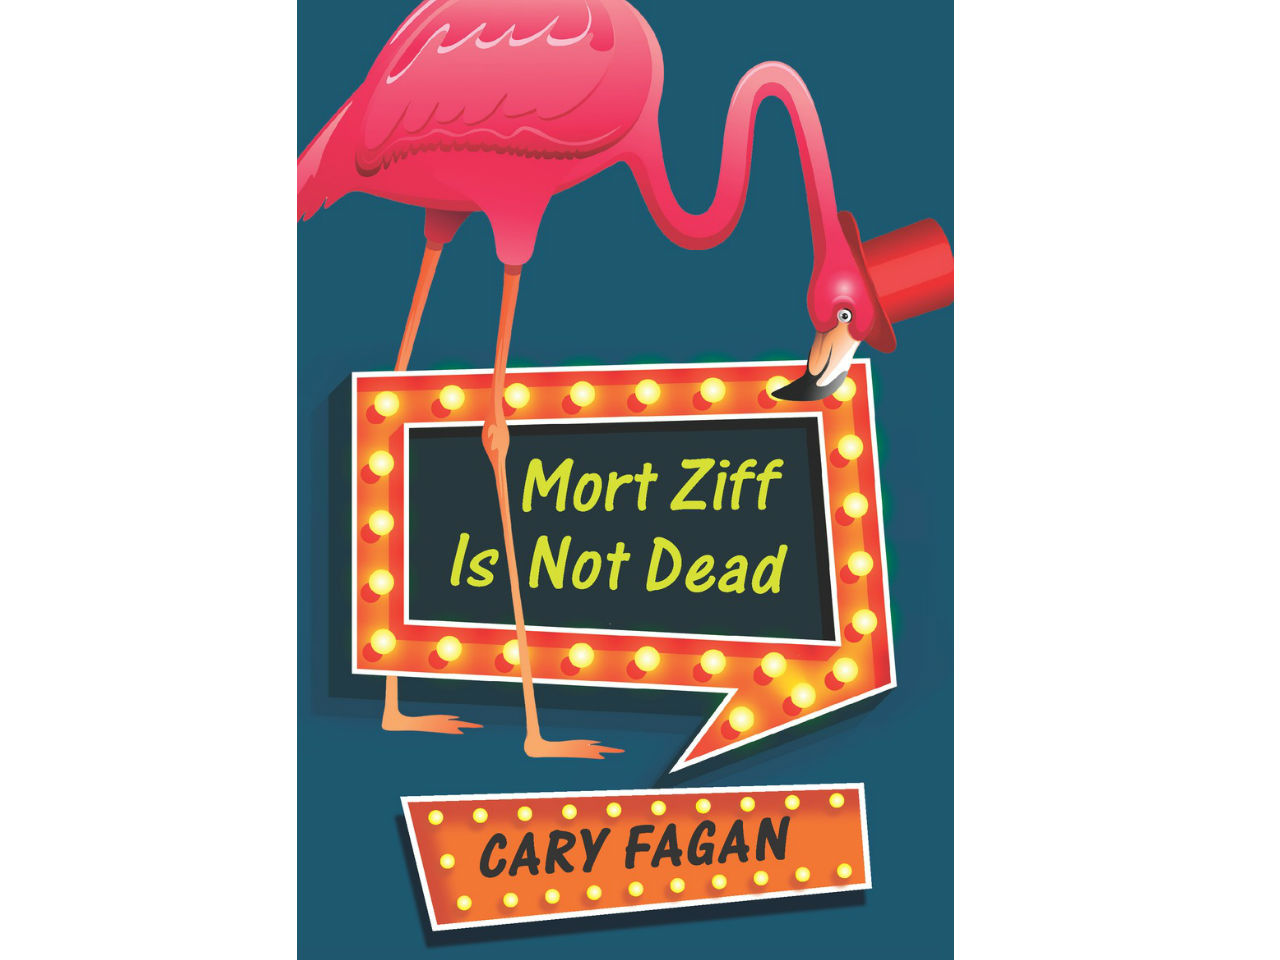 Cover of Mort Ziff Is Not Dead with flamingo wearing a top hat